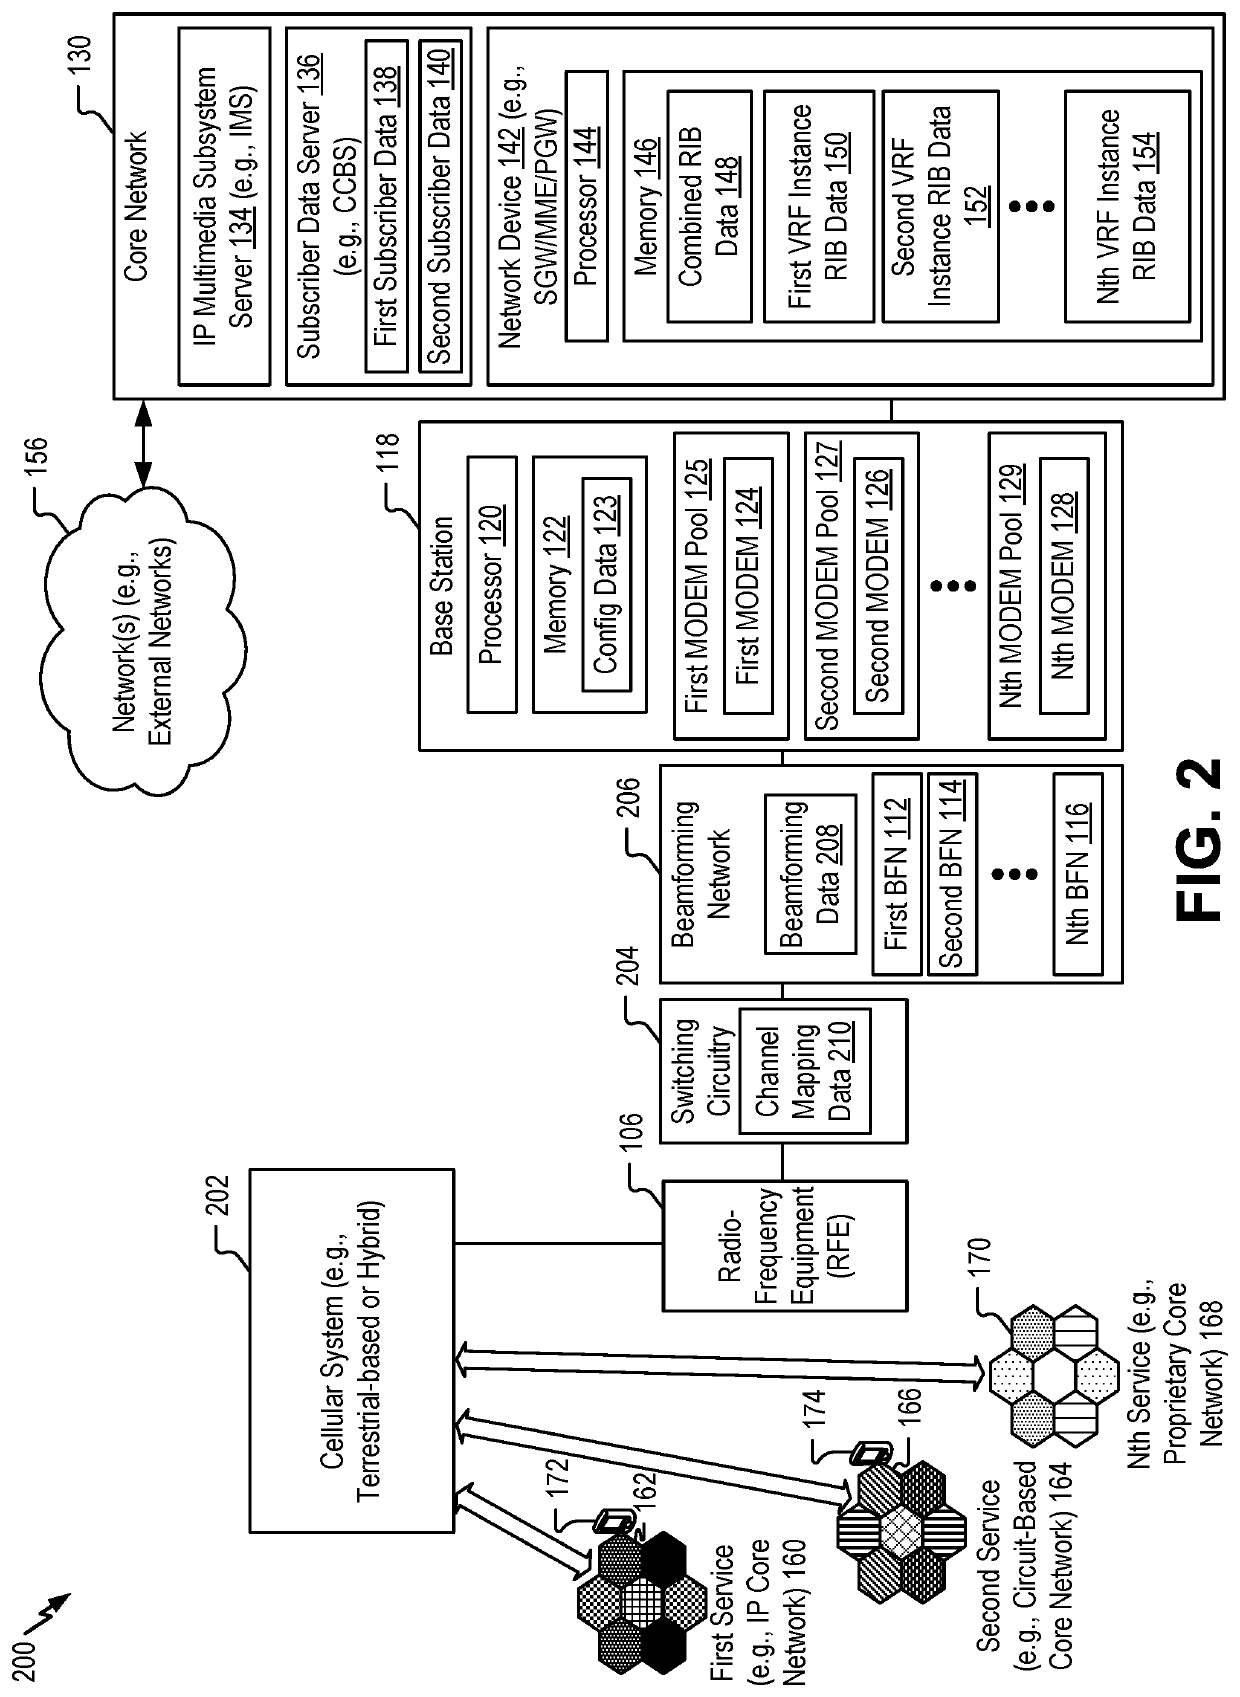 System and method for network traffic processing based on federated services and user groups